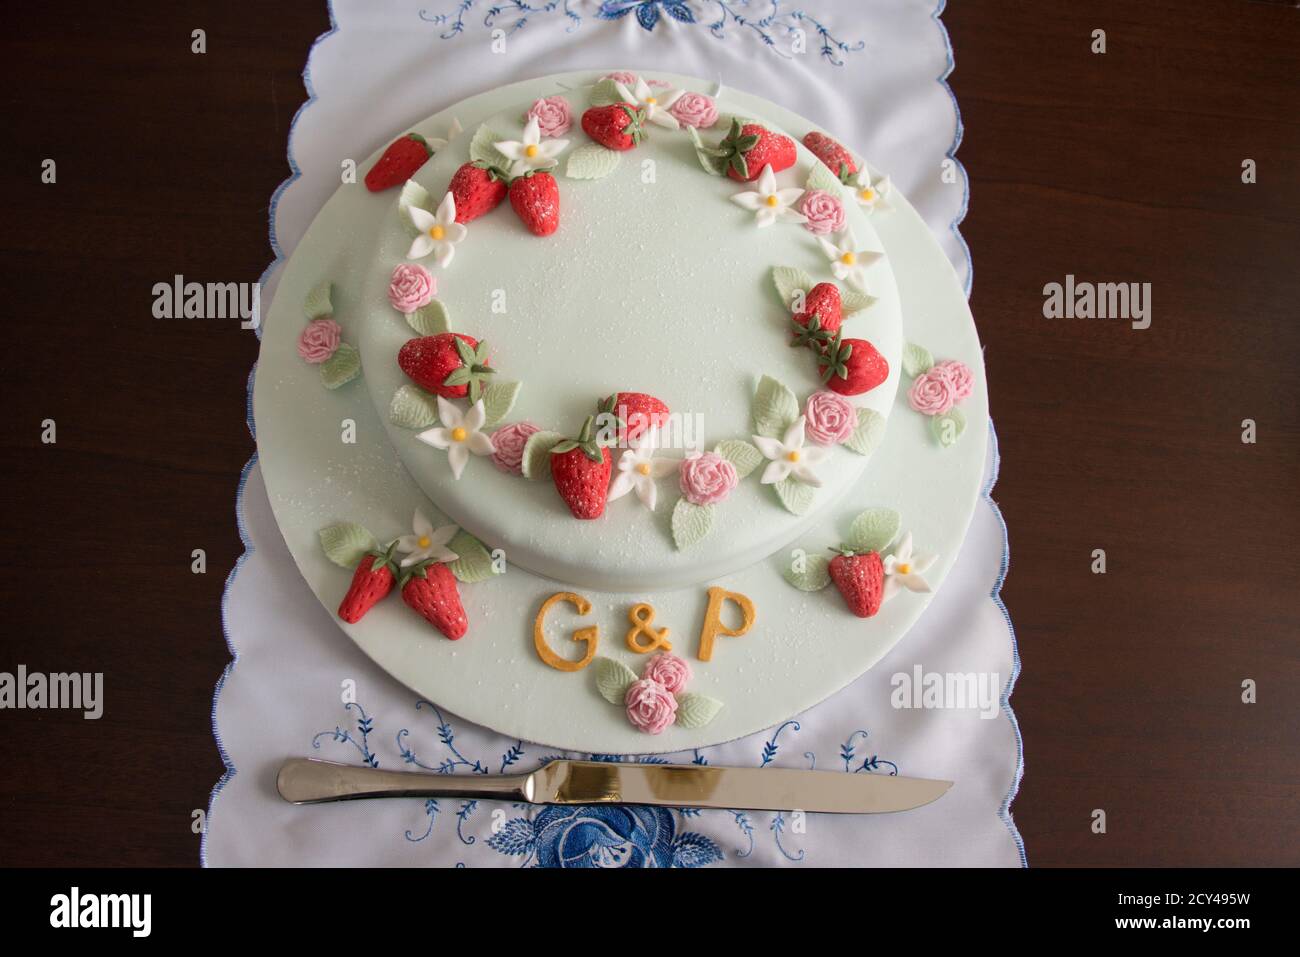 Joint birthday cake with initials G & P, iced with summer fruits and flowers Stock Photo